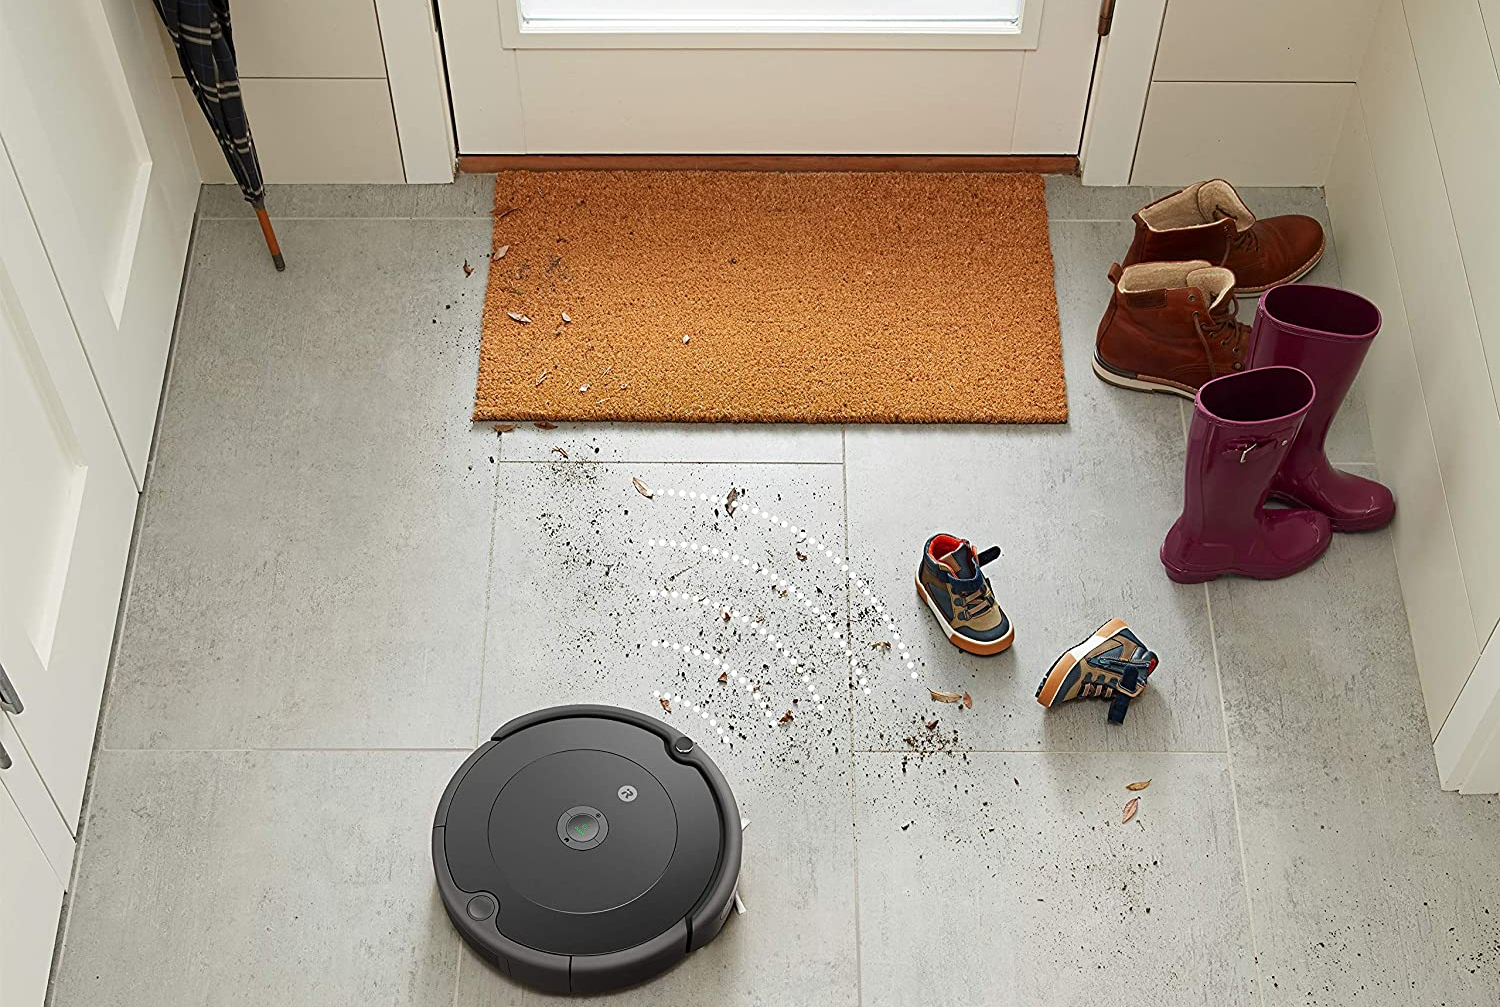 You can get up to $200 off of the iRobot Roomba j7 and iRobot Roomba i3 Evo  robot vacuums - The Verge